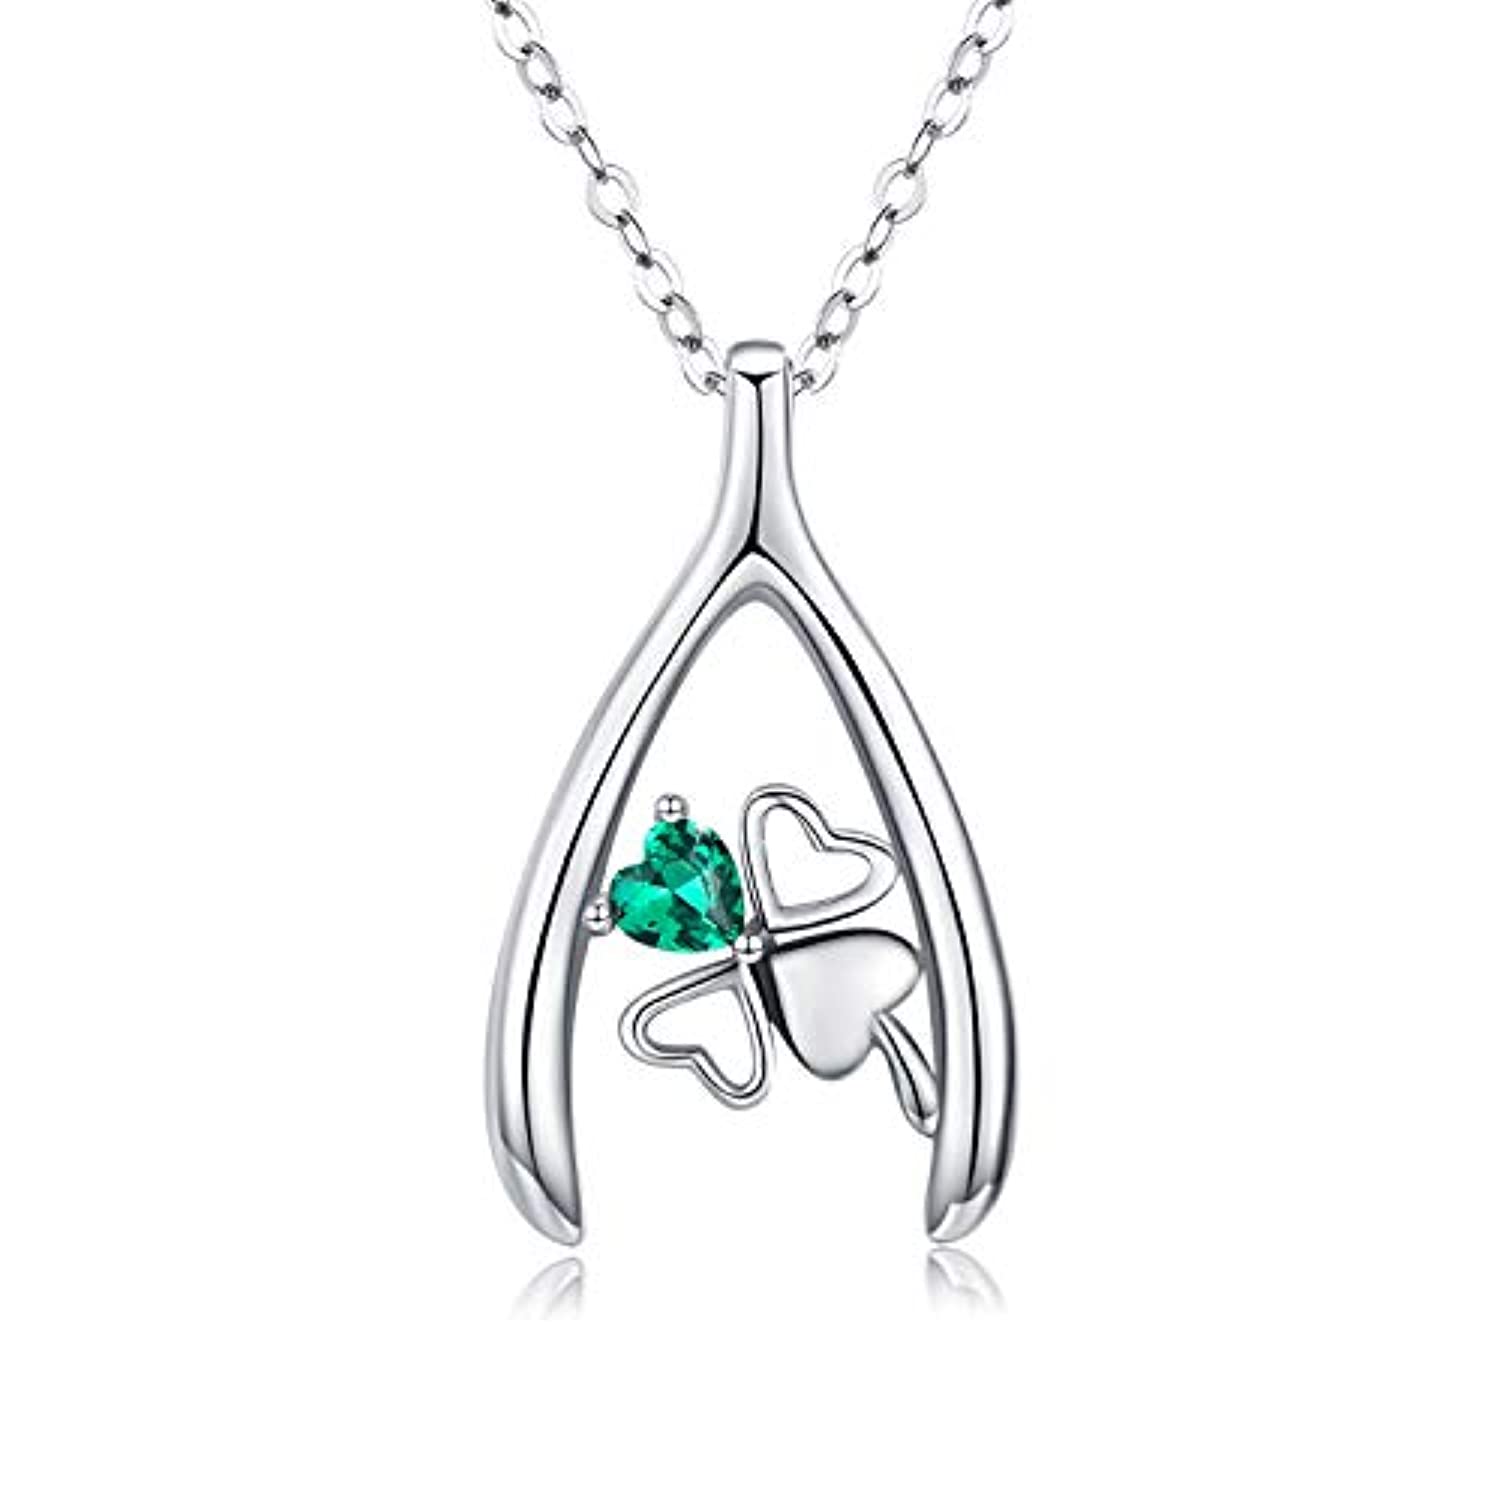 Cubic Zirconia Wishbone Necklace in Sterling Silver